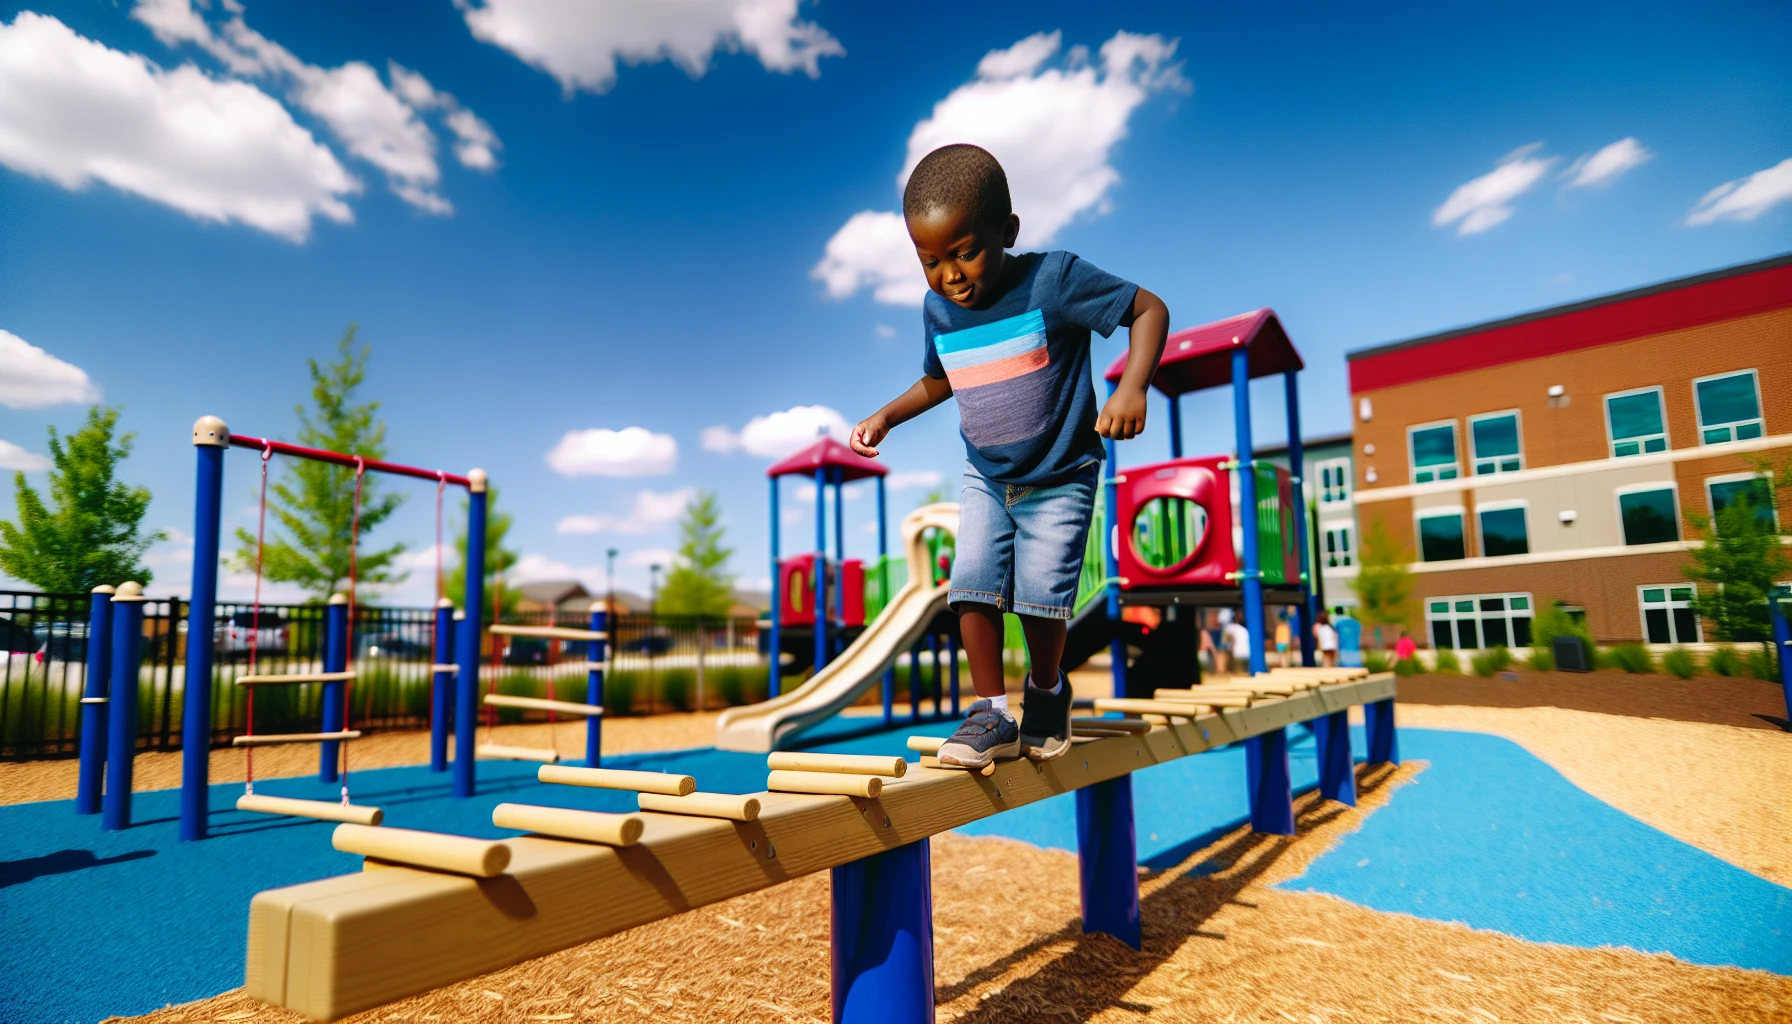 Child confidently walking across a wooden balance beam at playground